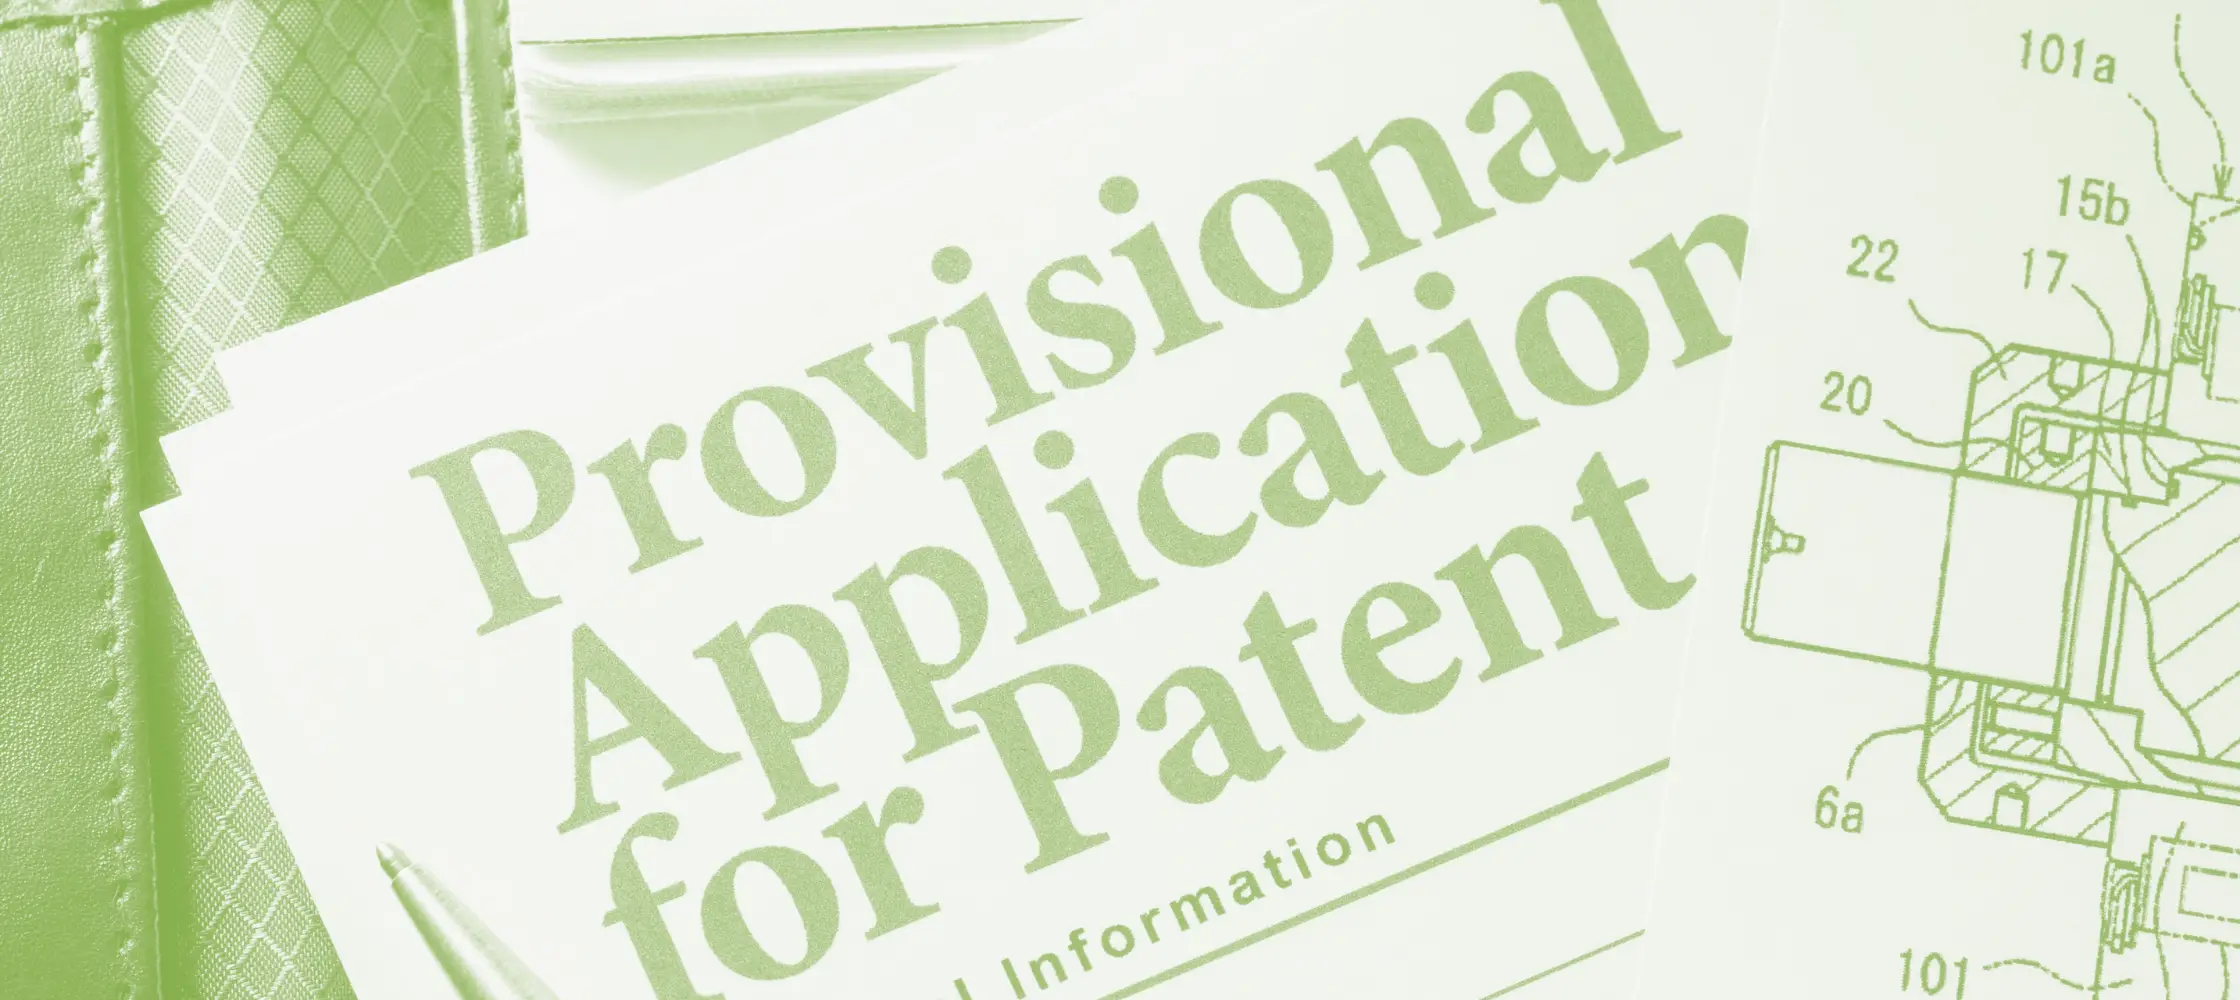 how to select a patent attorney stop 2022